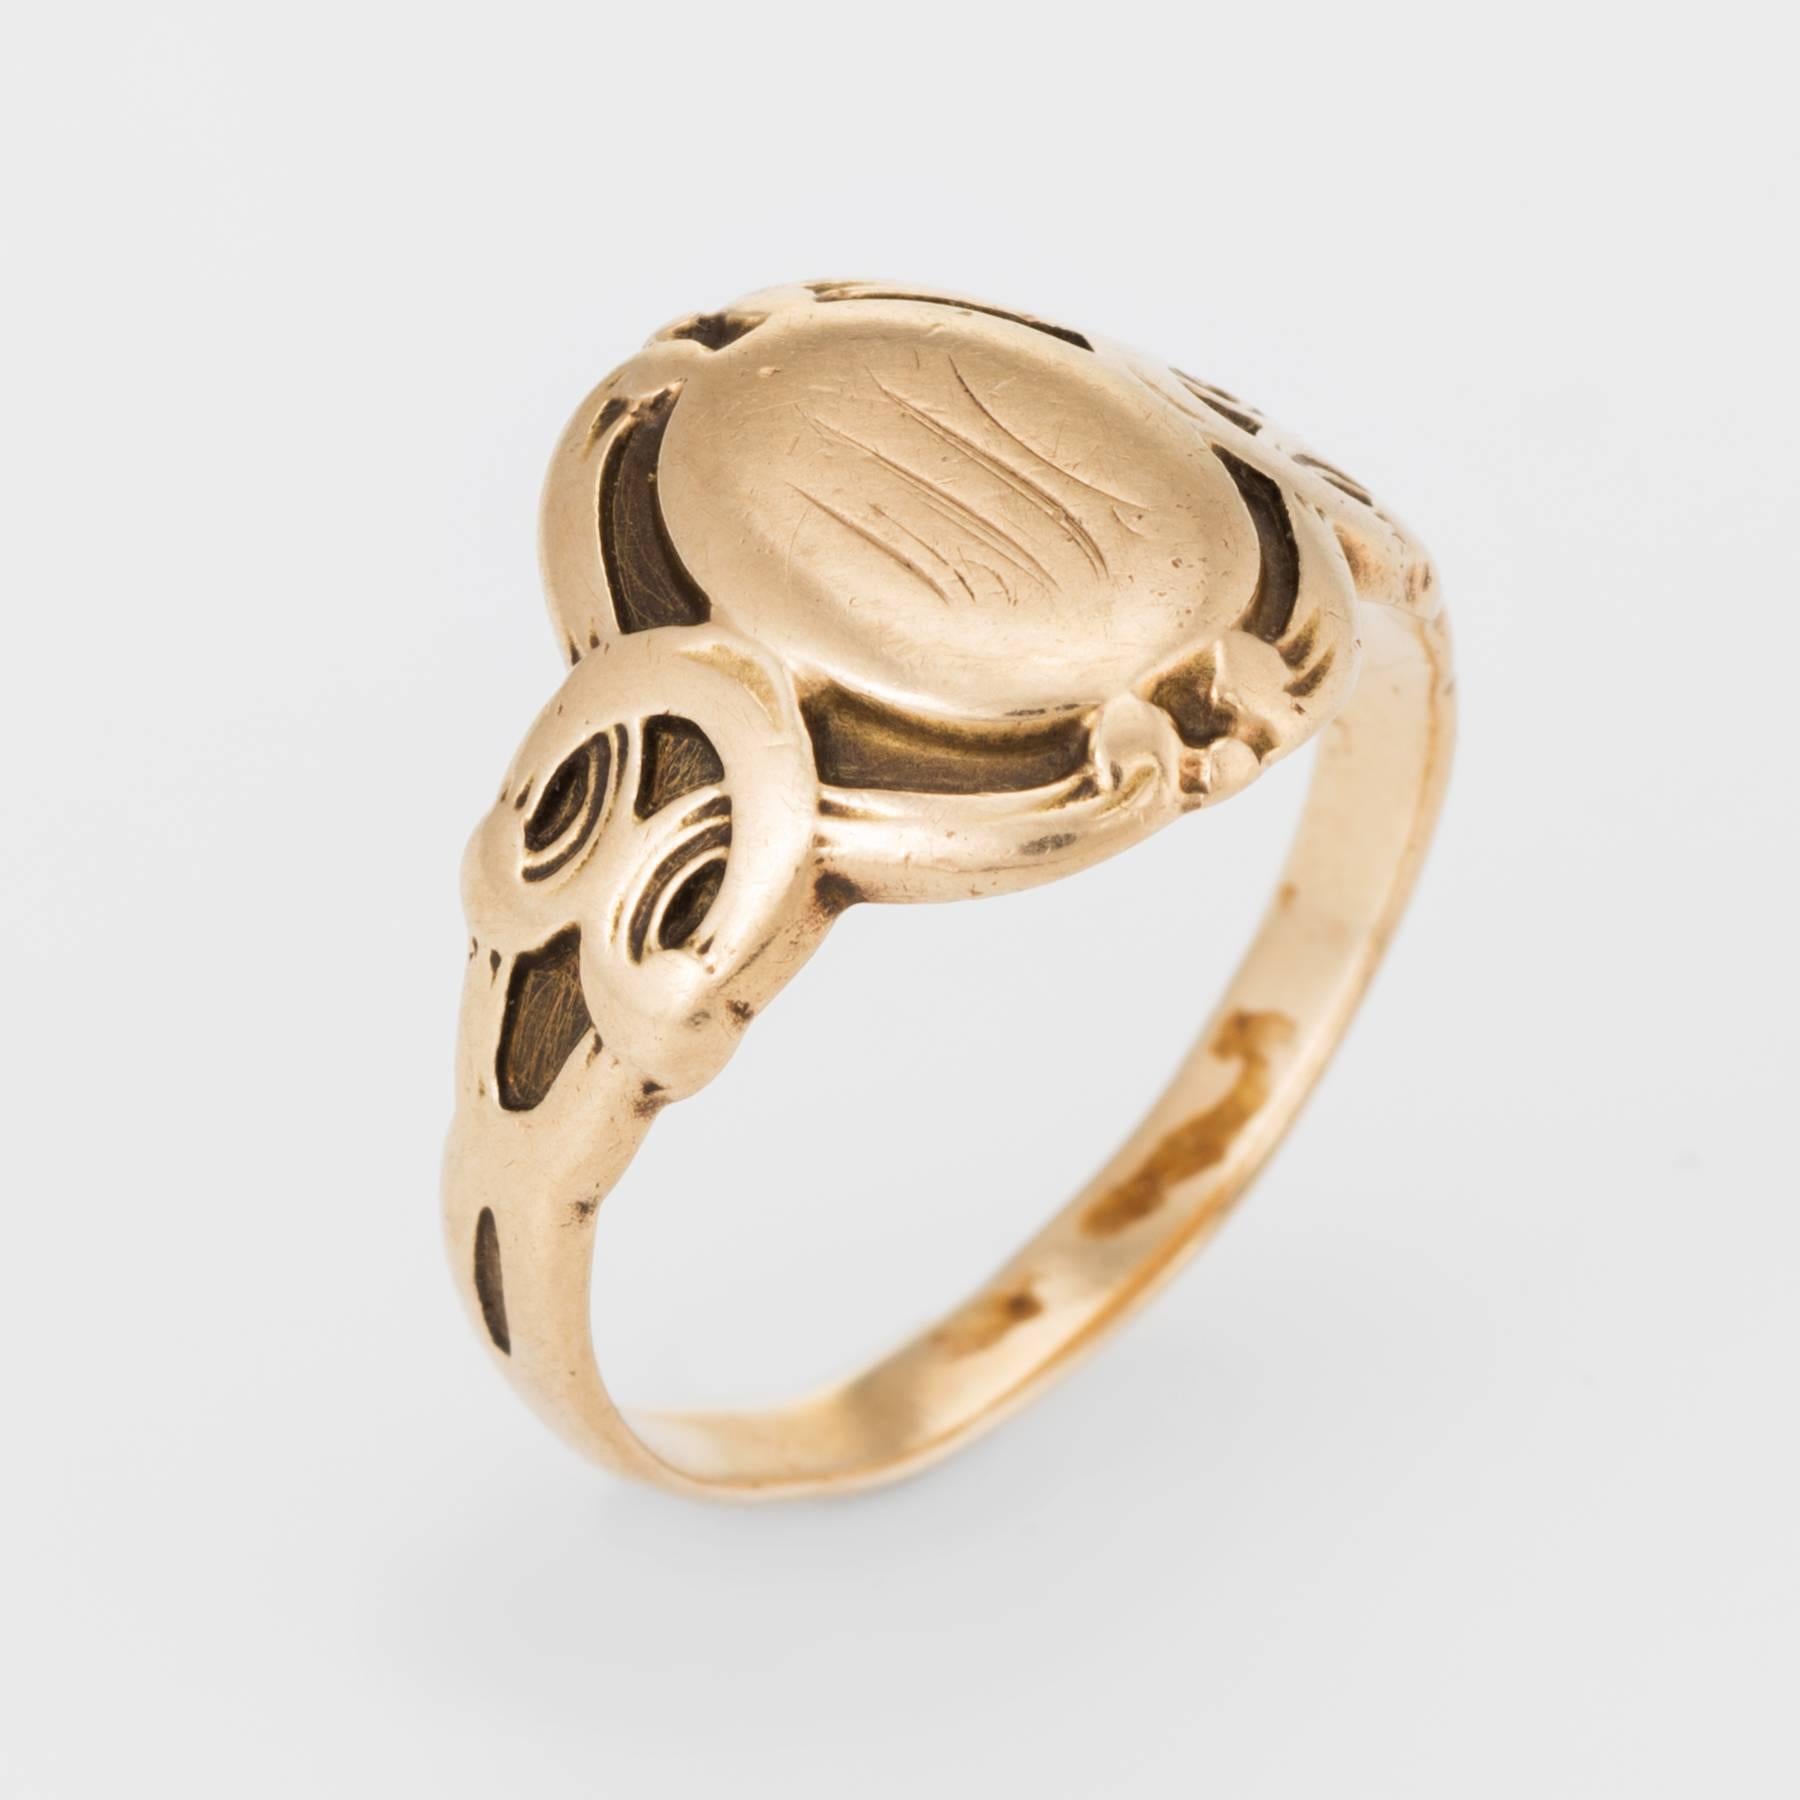 Victorian era signet band (circa 1880s to 1900s), crafted in 14 karat yellow gold.

Charming oval signet features scrolled side shoulder detail. Note: the inscription along with the side shoulders has worn down due to the age of the ring.  

The